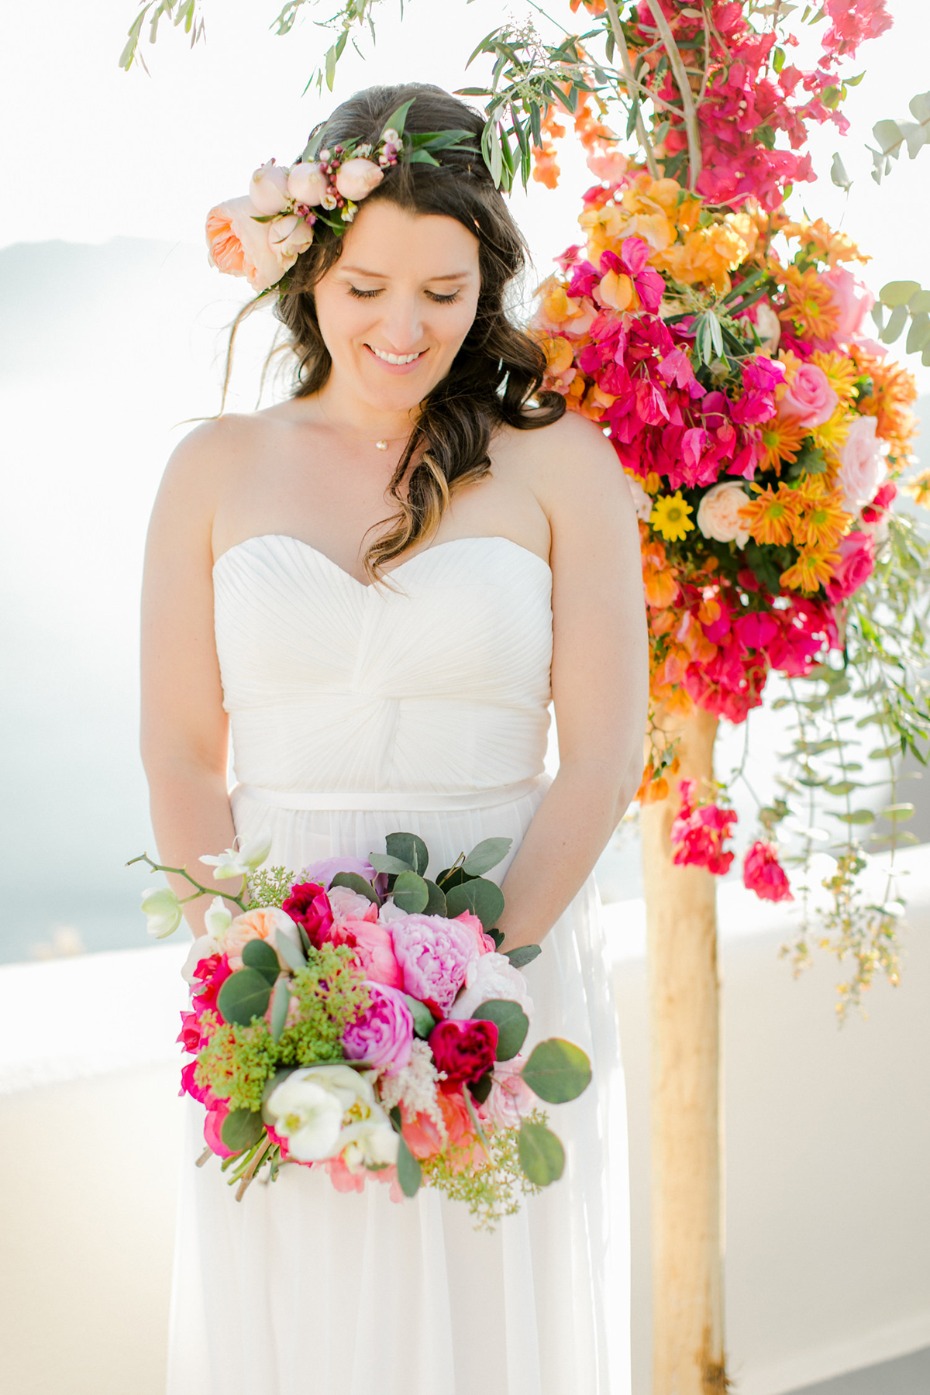 Bright and colorful bridal style